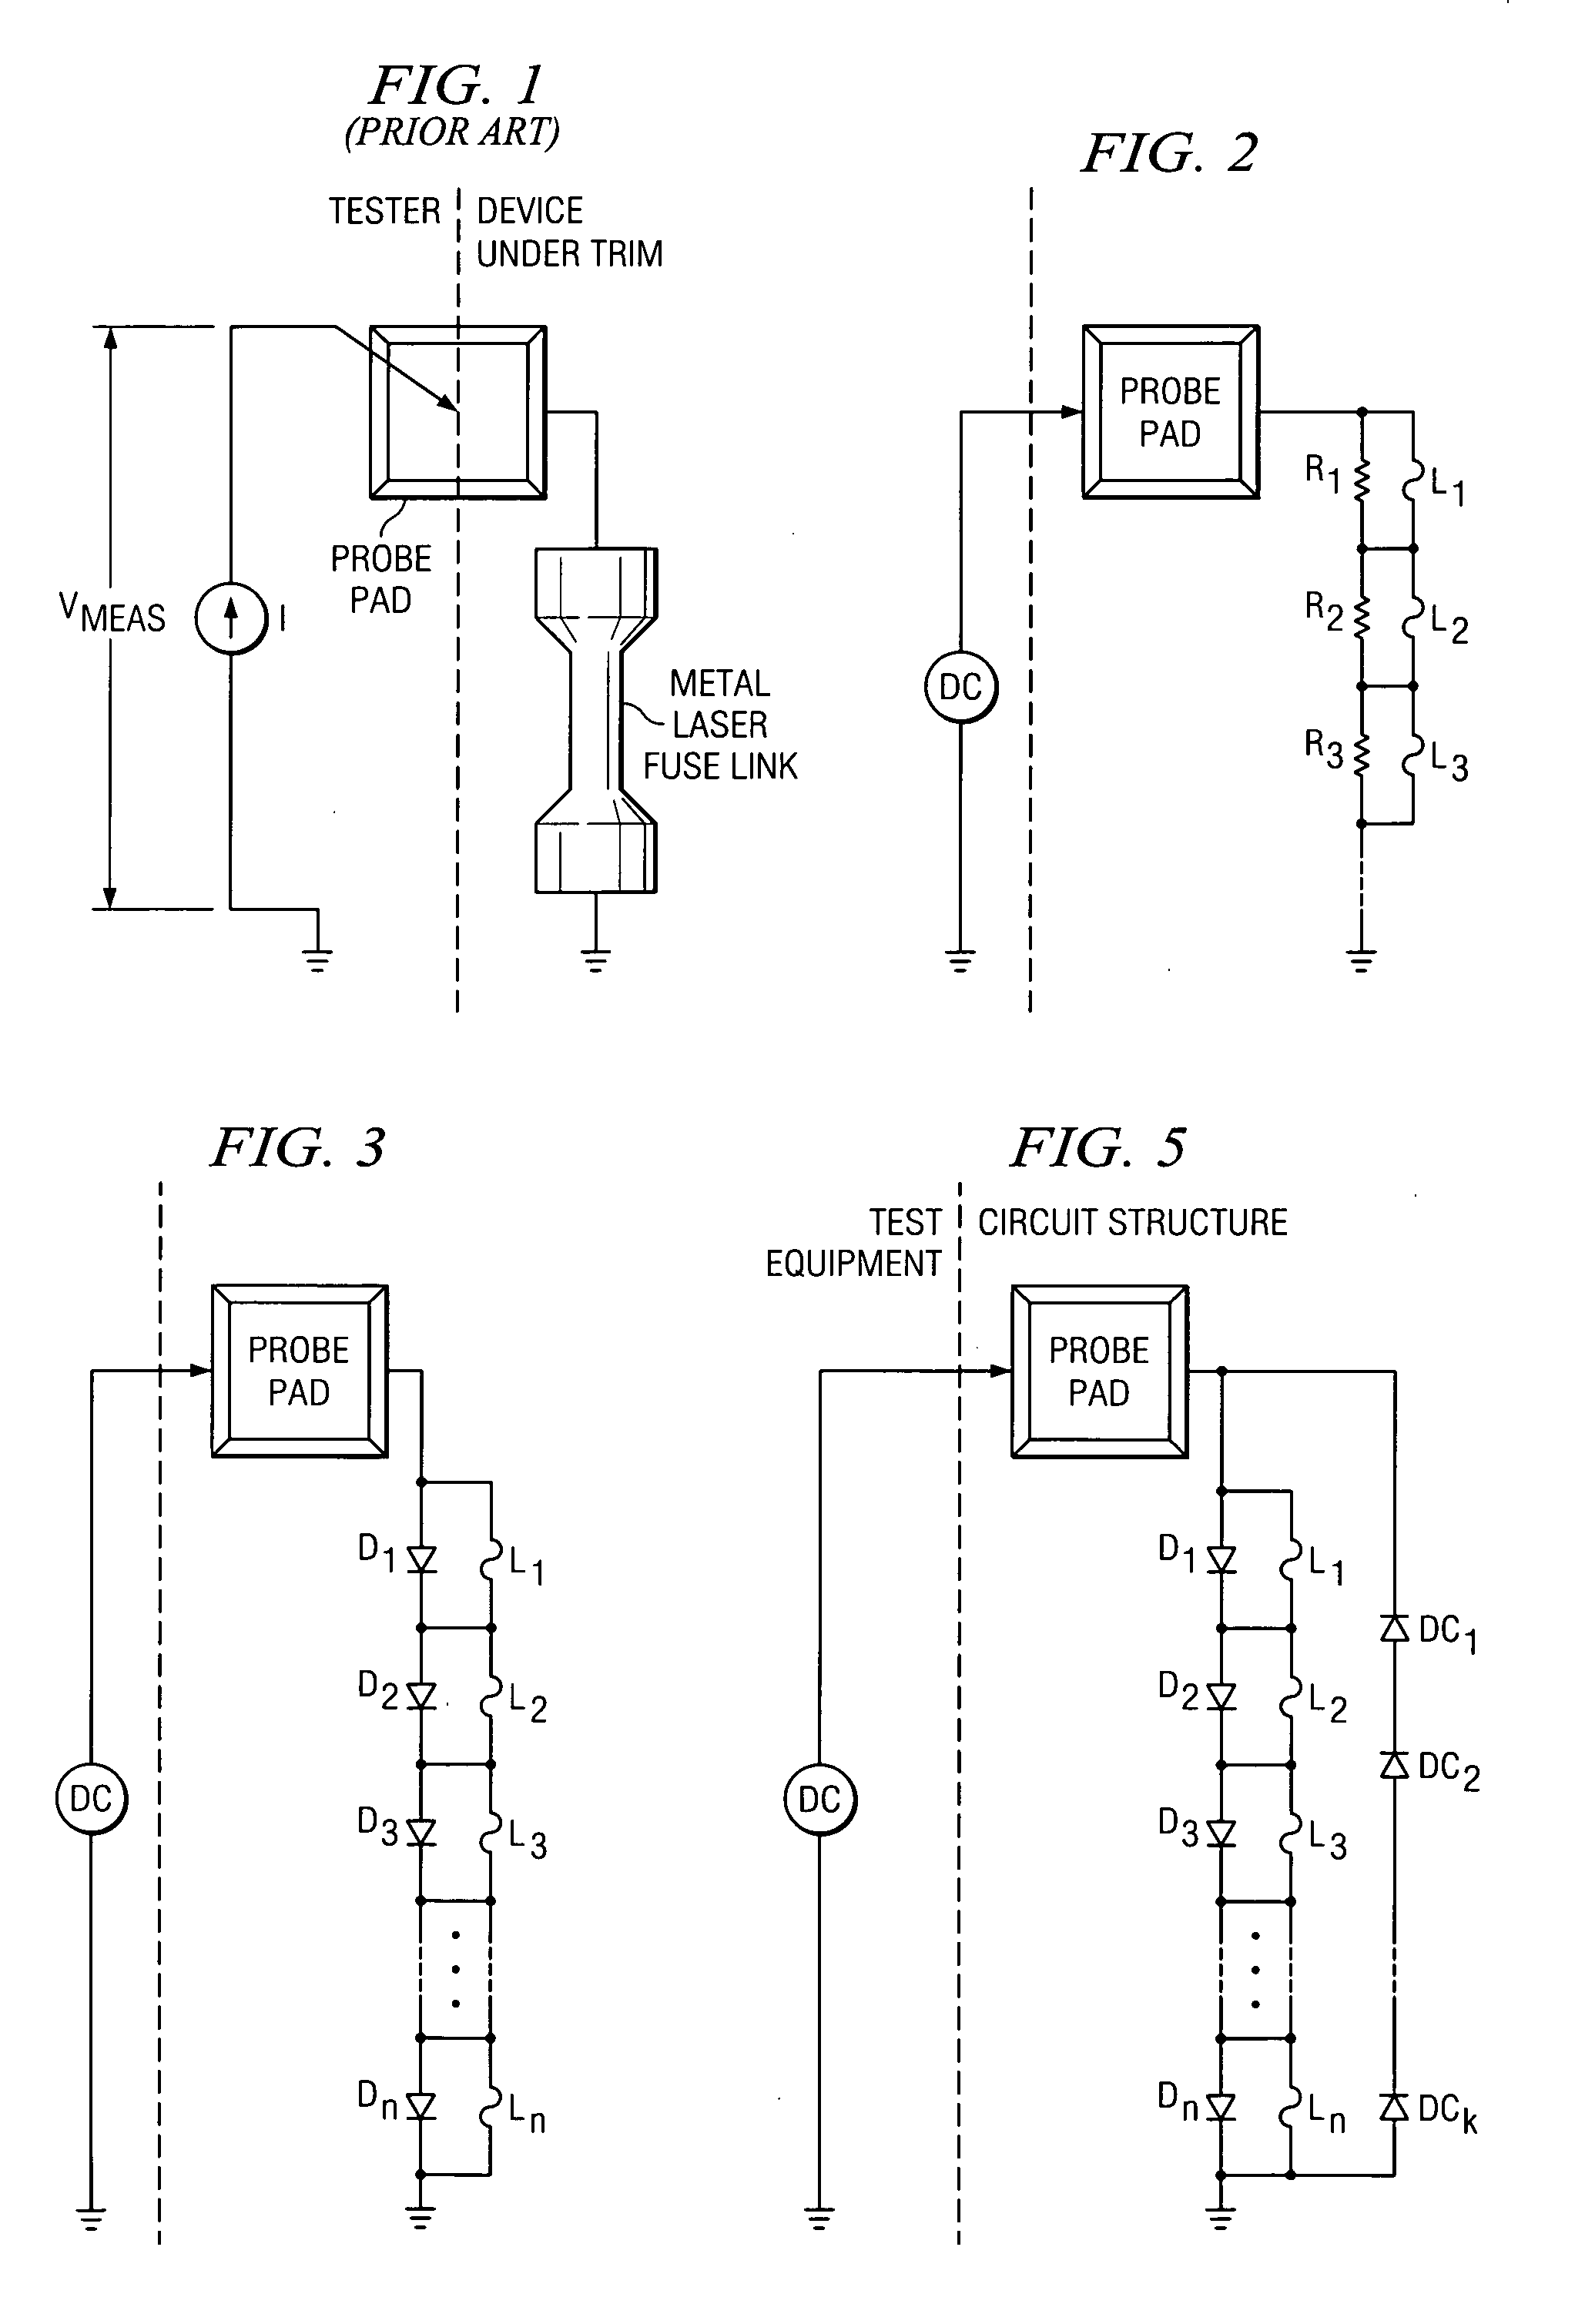 Device for recording laser trim progress and for detecting laser beam misalignment